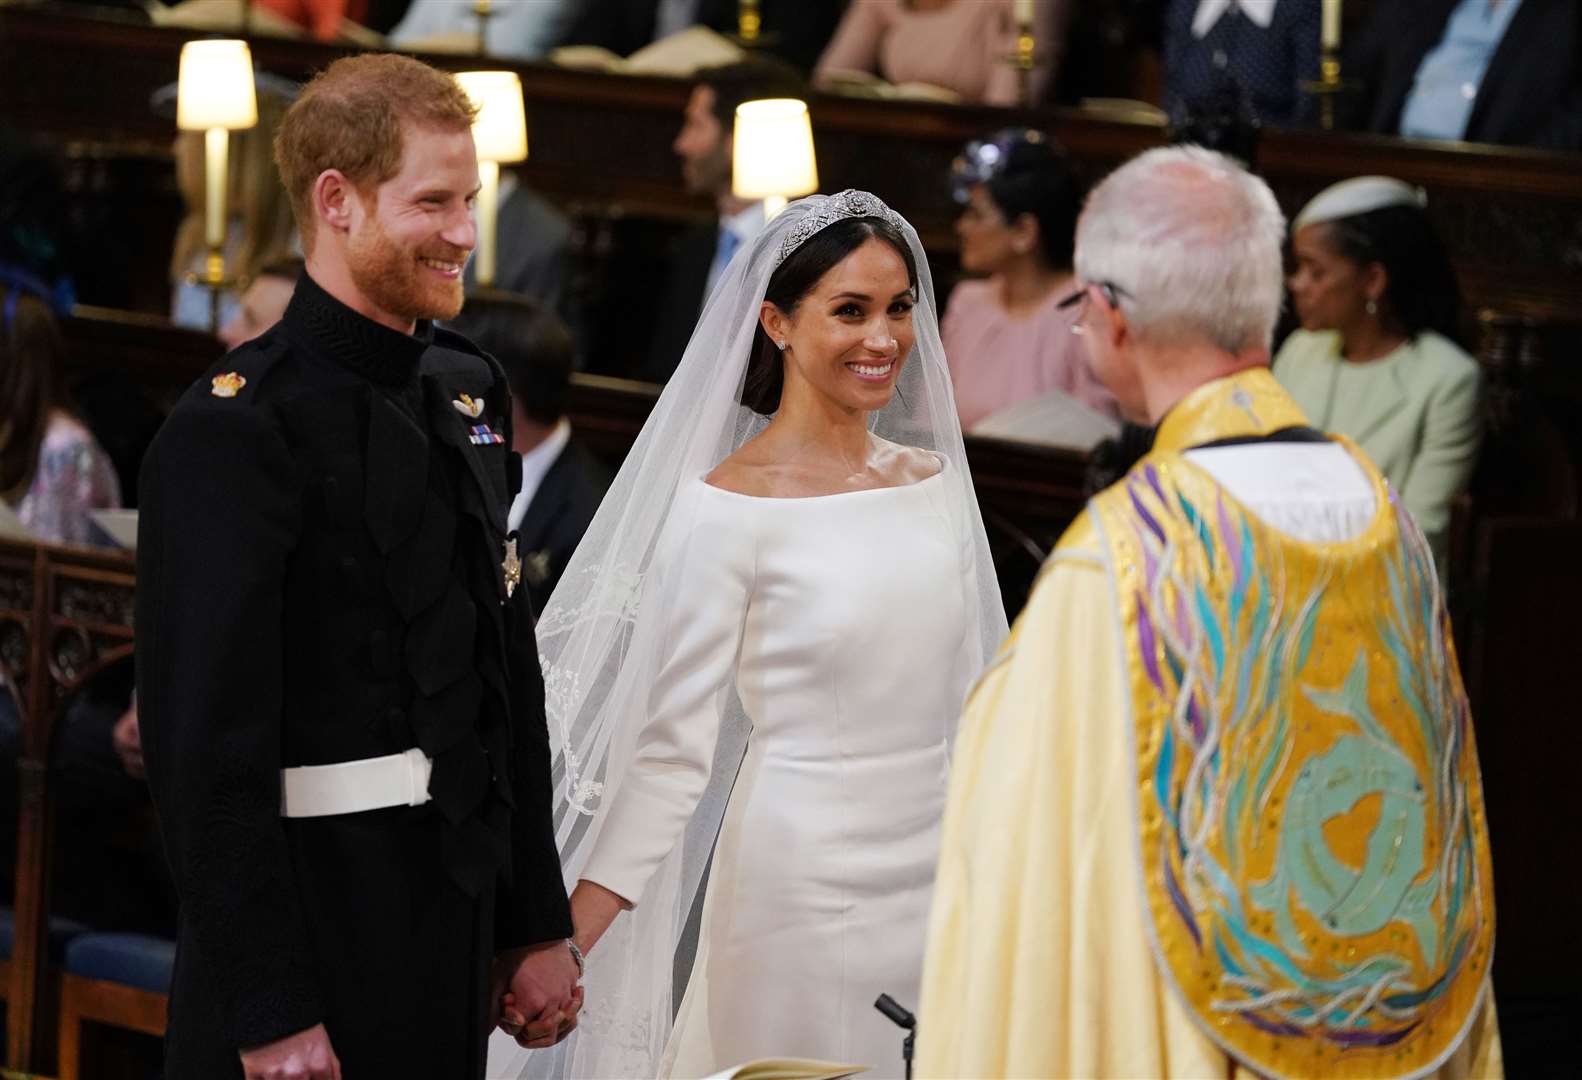 Harry and Meghan during their wedding ceremony at St George’s Chapel, Windsor Castle in 2018 (Dominic Lipinski/PA)